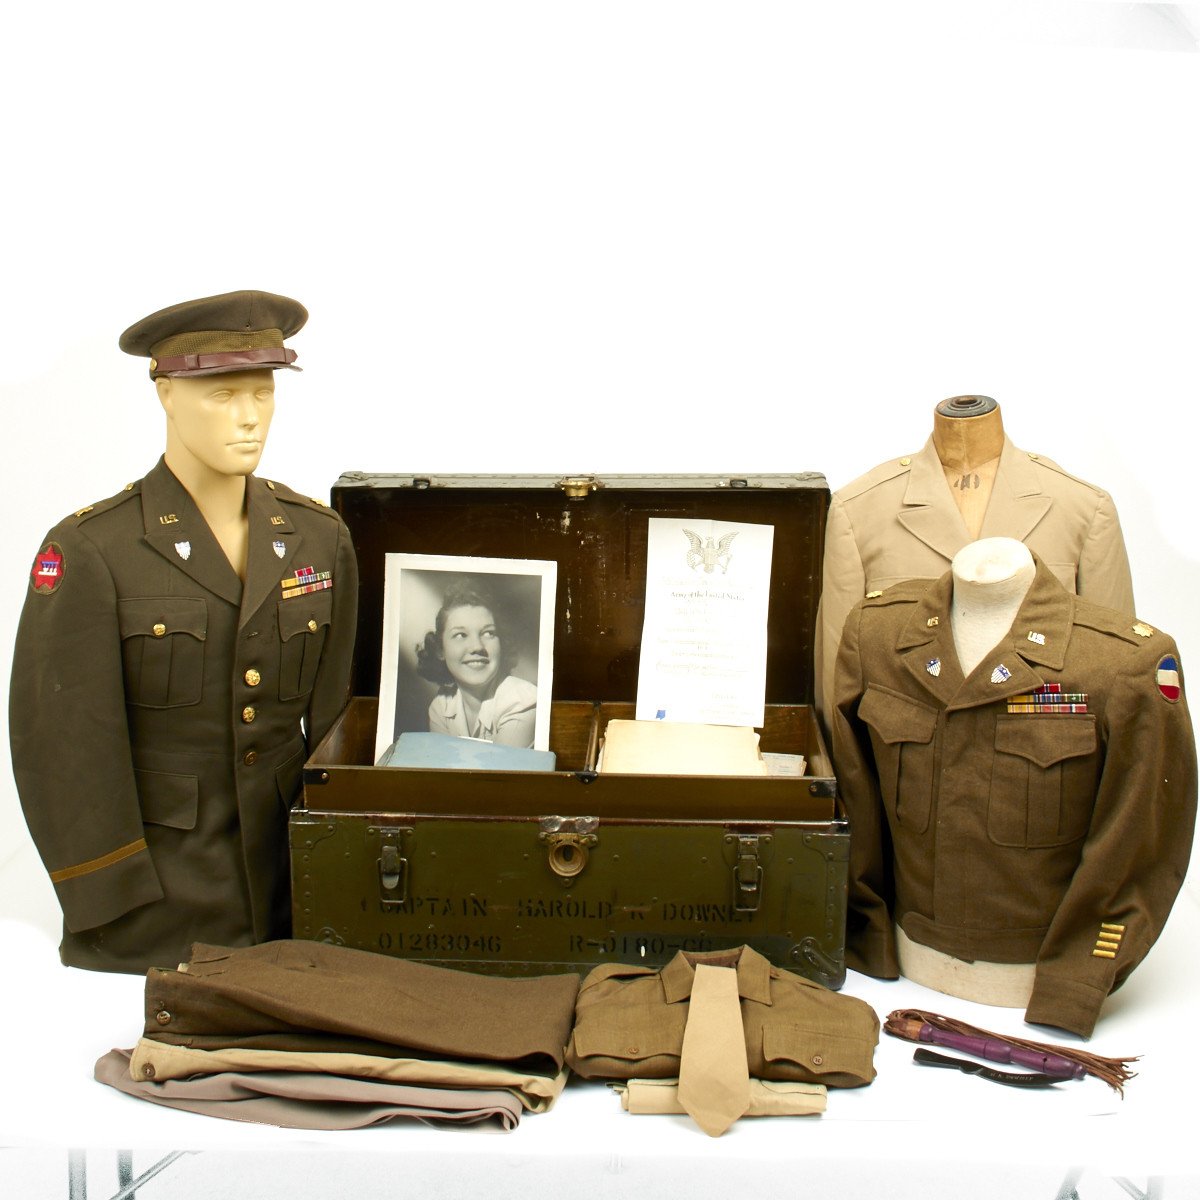 What Lies Within The Footlocker of a WWII Soldier